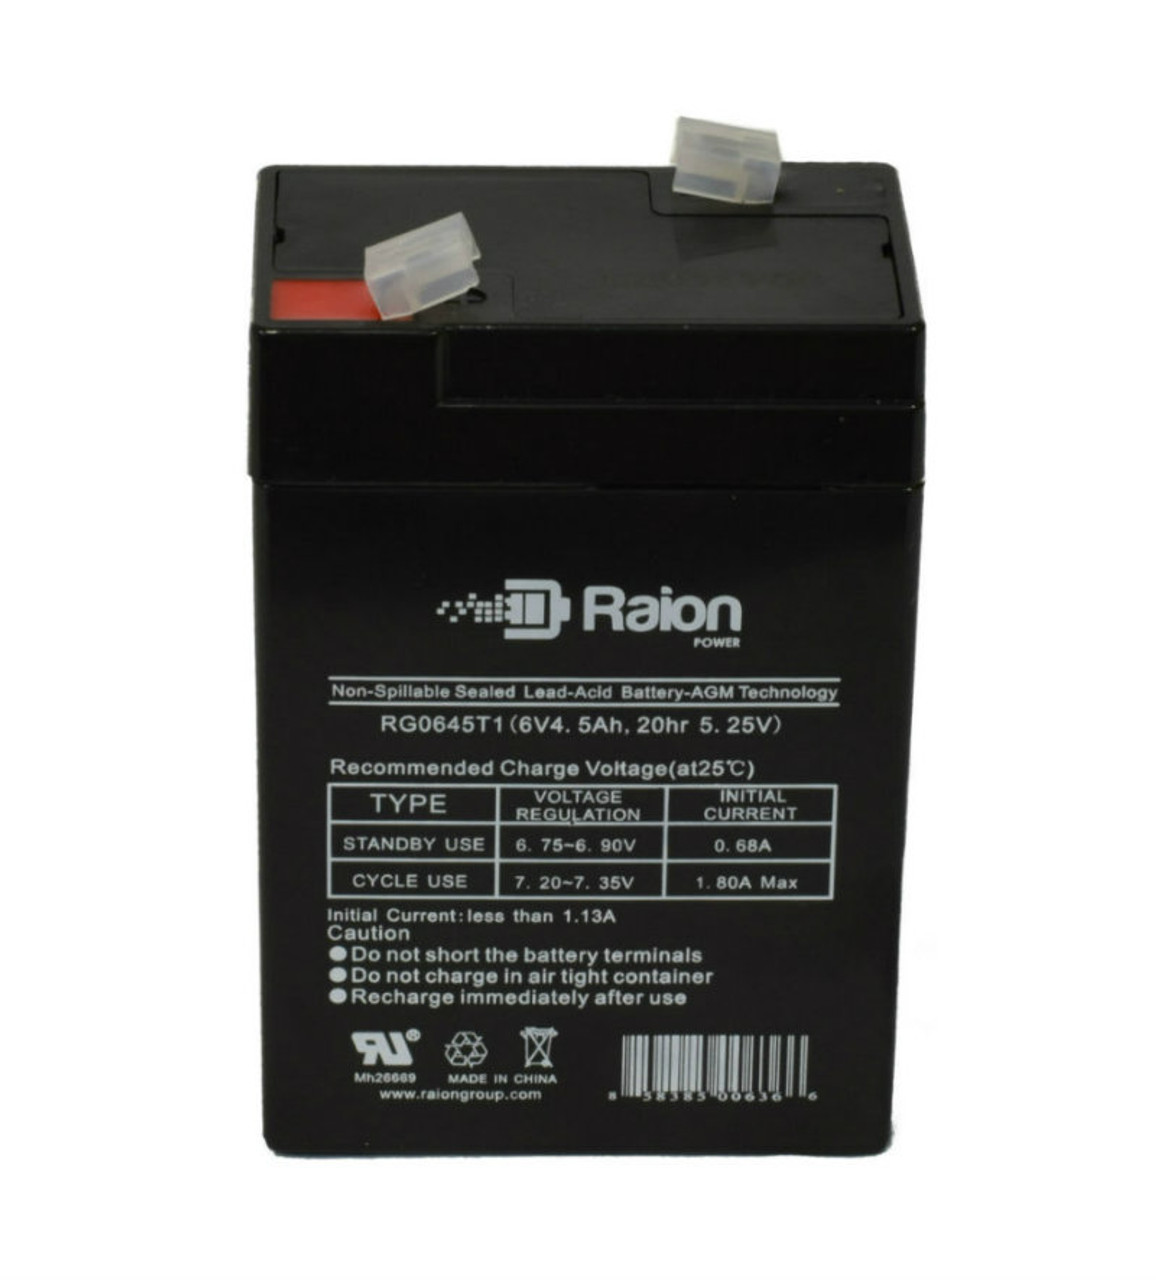 Raion Power RG0645T1 Replacement Battery Cartridge for Alexander G64016